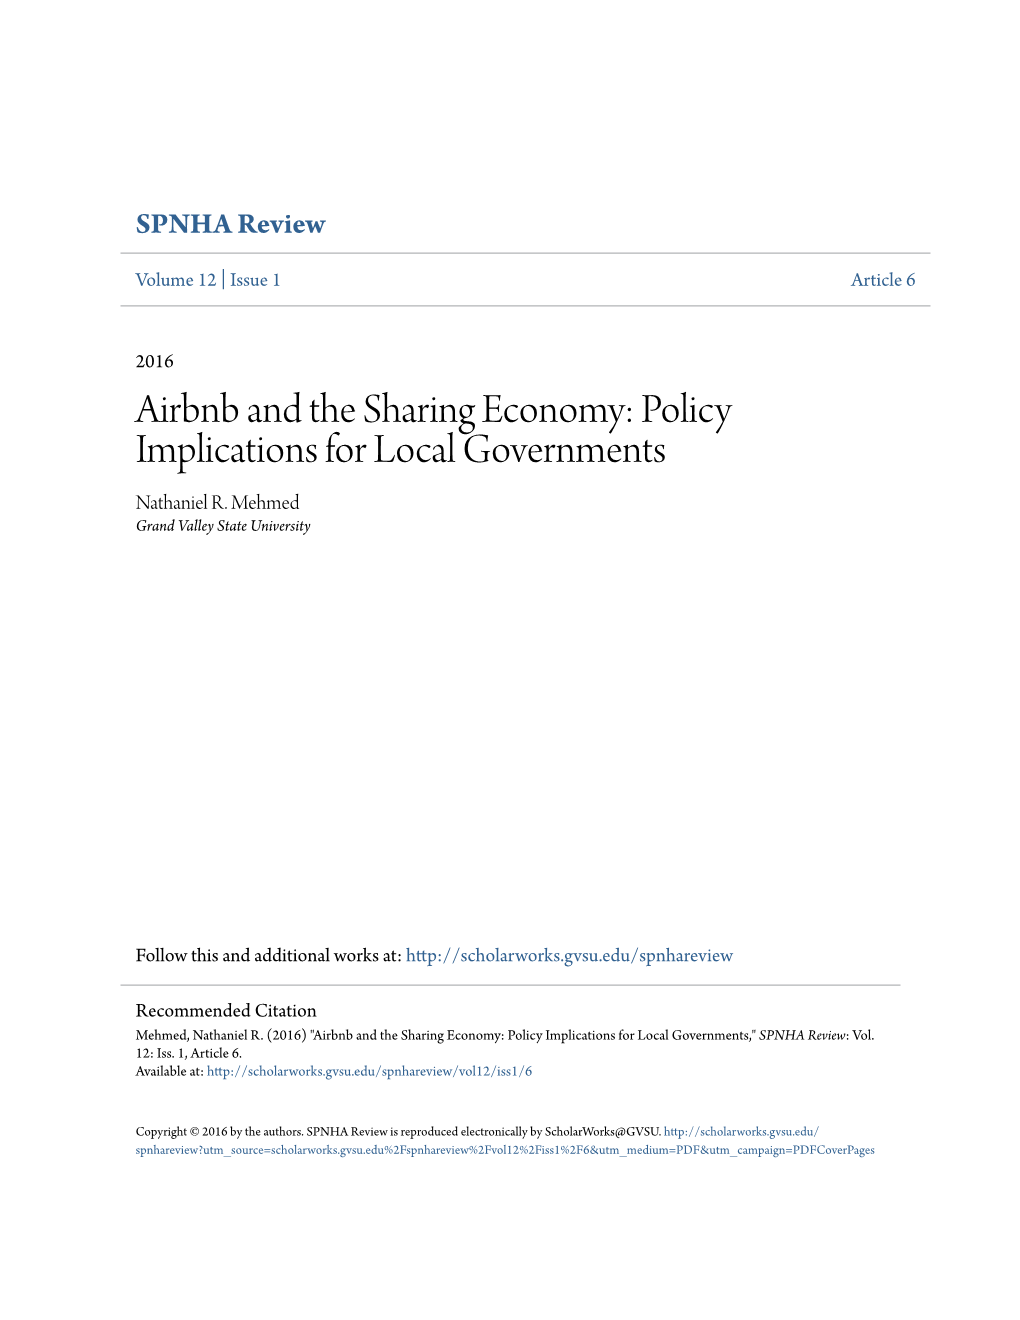 Airbnb and the Sharing Economy: Policy Implications for Local Governments Nathaniel R